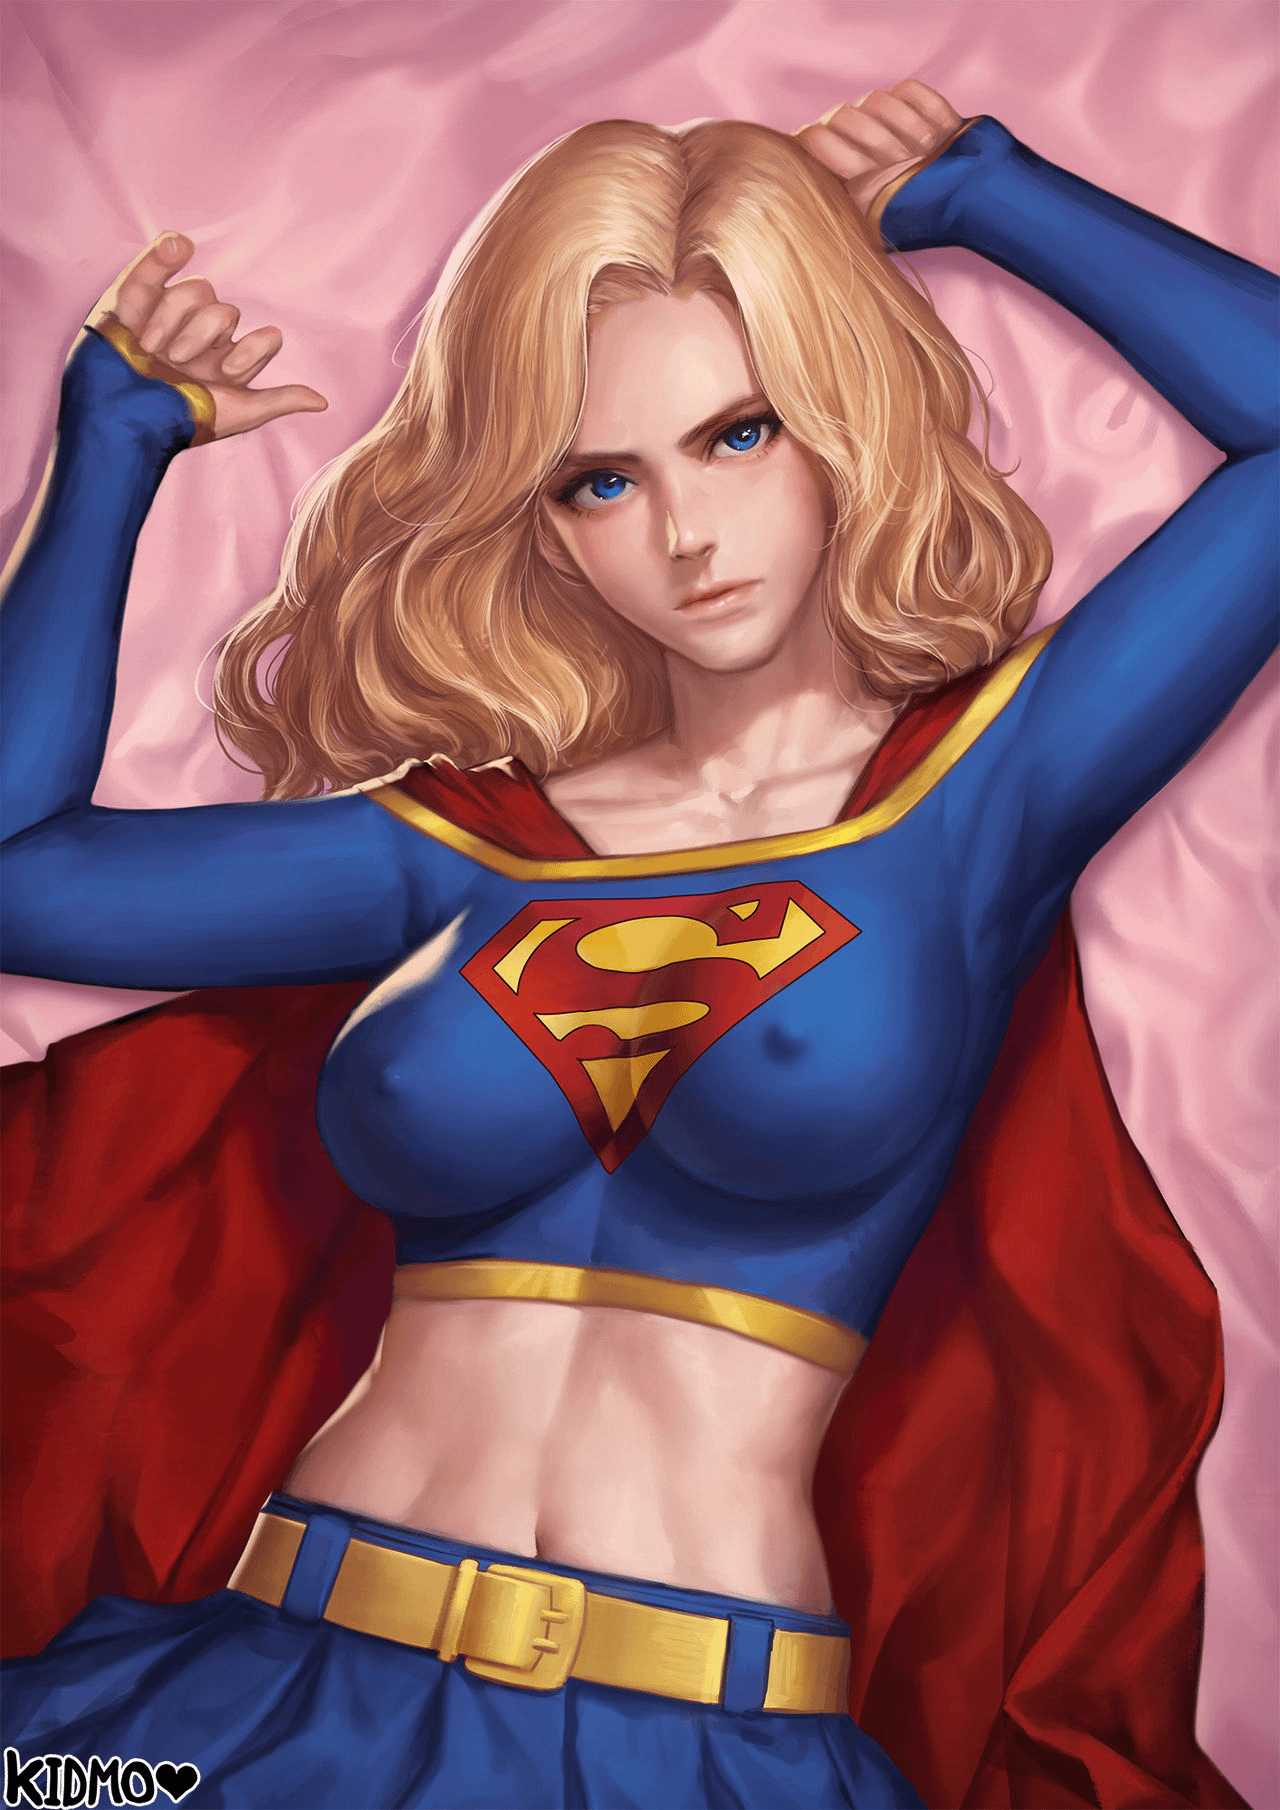 darcy gregory share rule 34 super girl photos